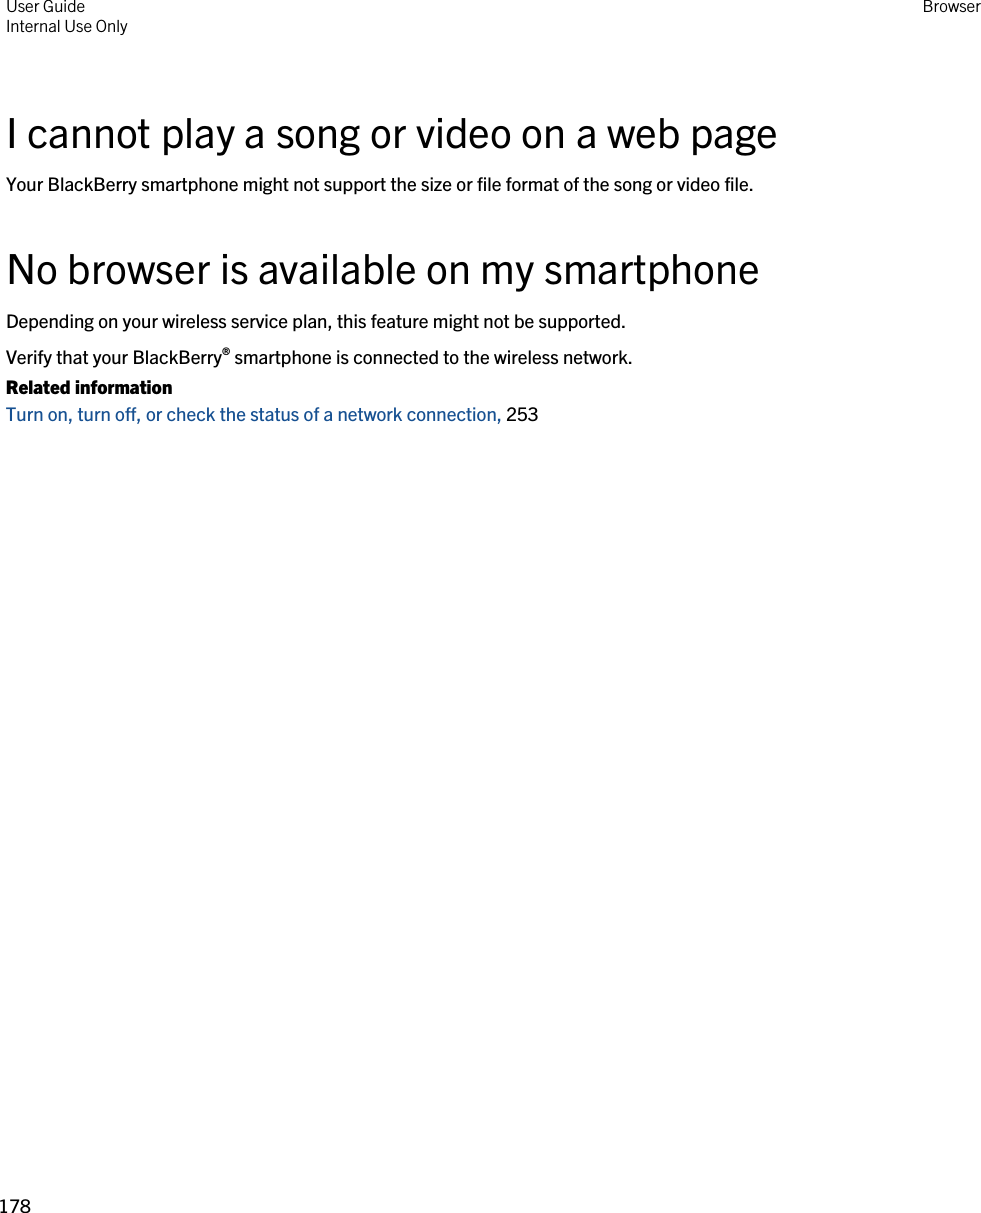 I cannot play a song or video on a web pageYour BlackBerry smartphone might not support the size or file format of the song or video file.No browser is available on my smartphoneDepending on your wireless service plan, this feature might not be supported.Verify that your BlackBerry® smartphone is connected to the wireless network.Related informationTurn on, turn off, or check the status of a network connection, 253User GuideInternal Use Only Browser178 